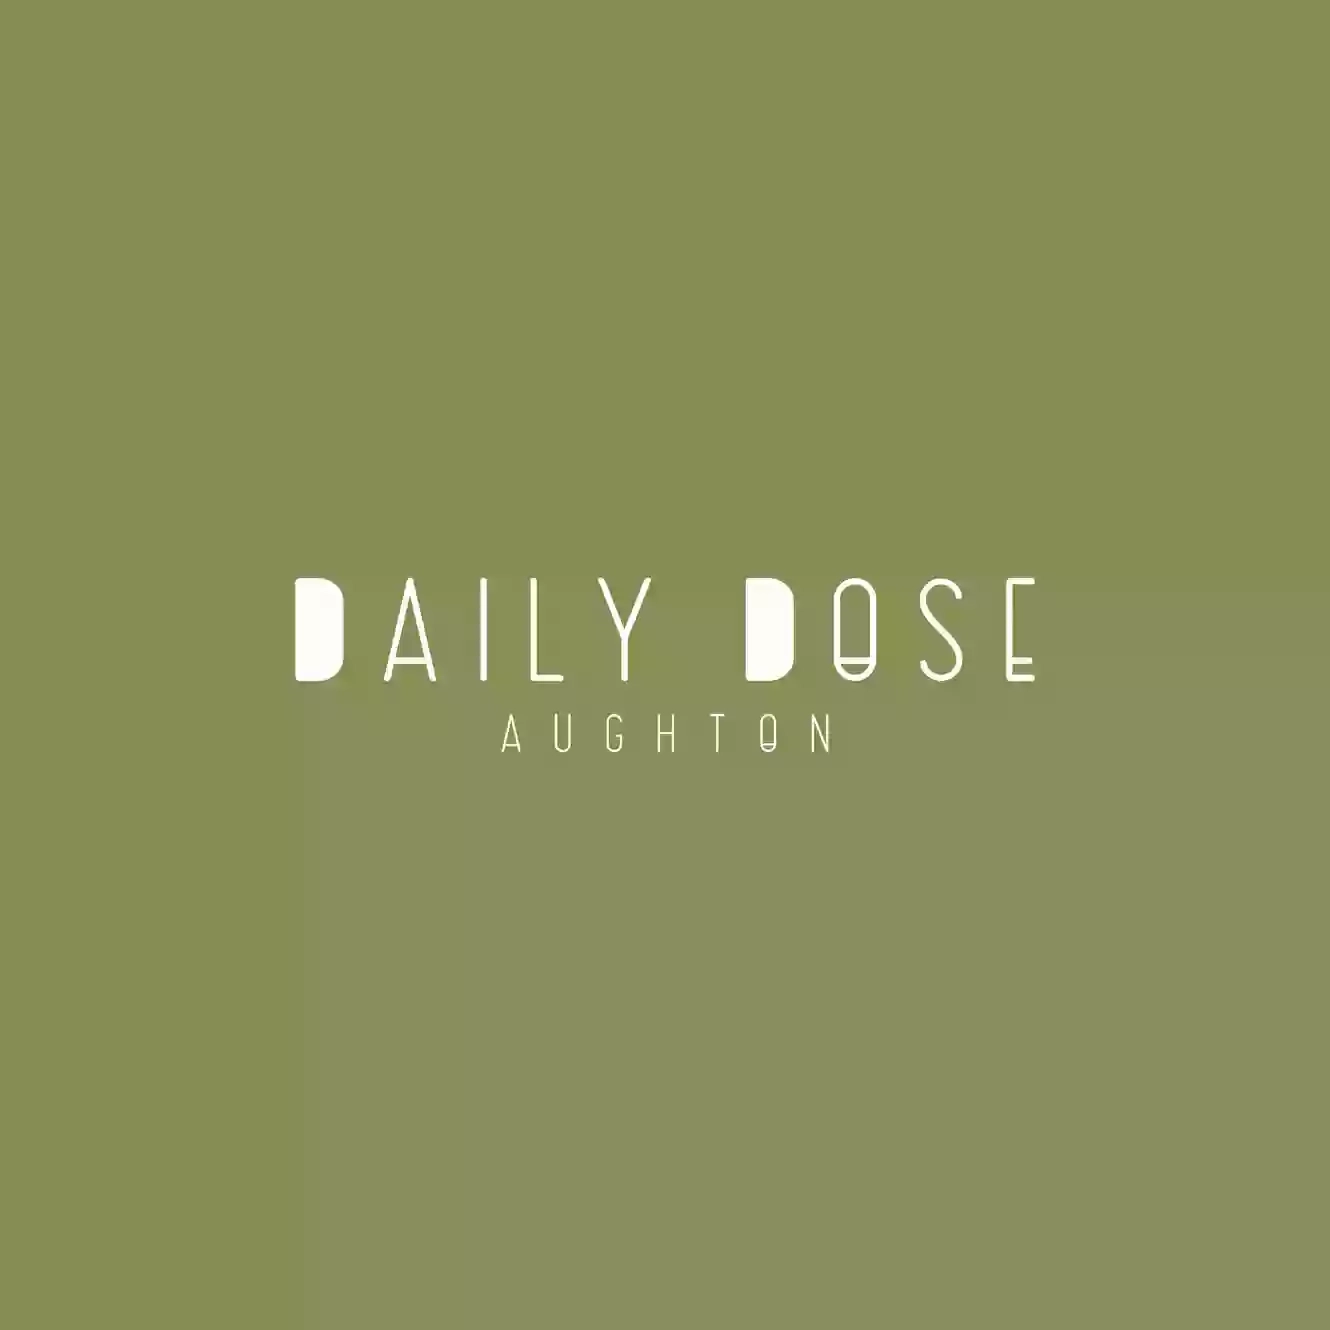 Daily Dose Coffee - Aughton